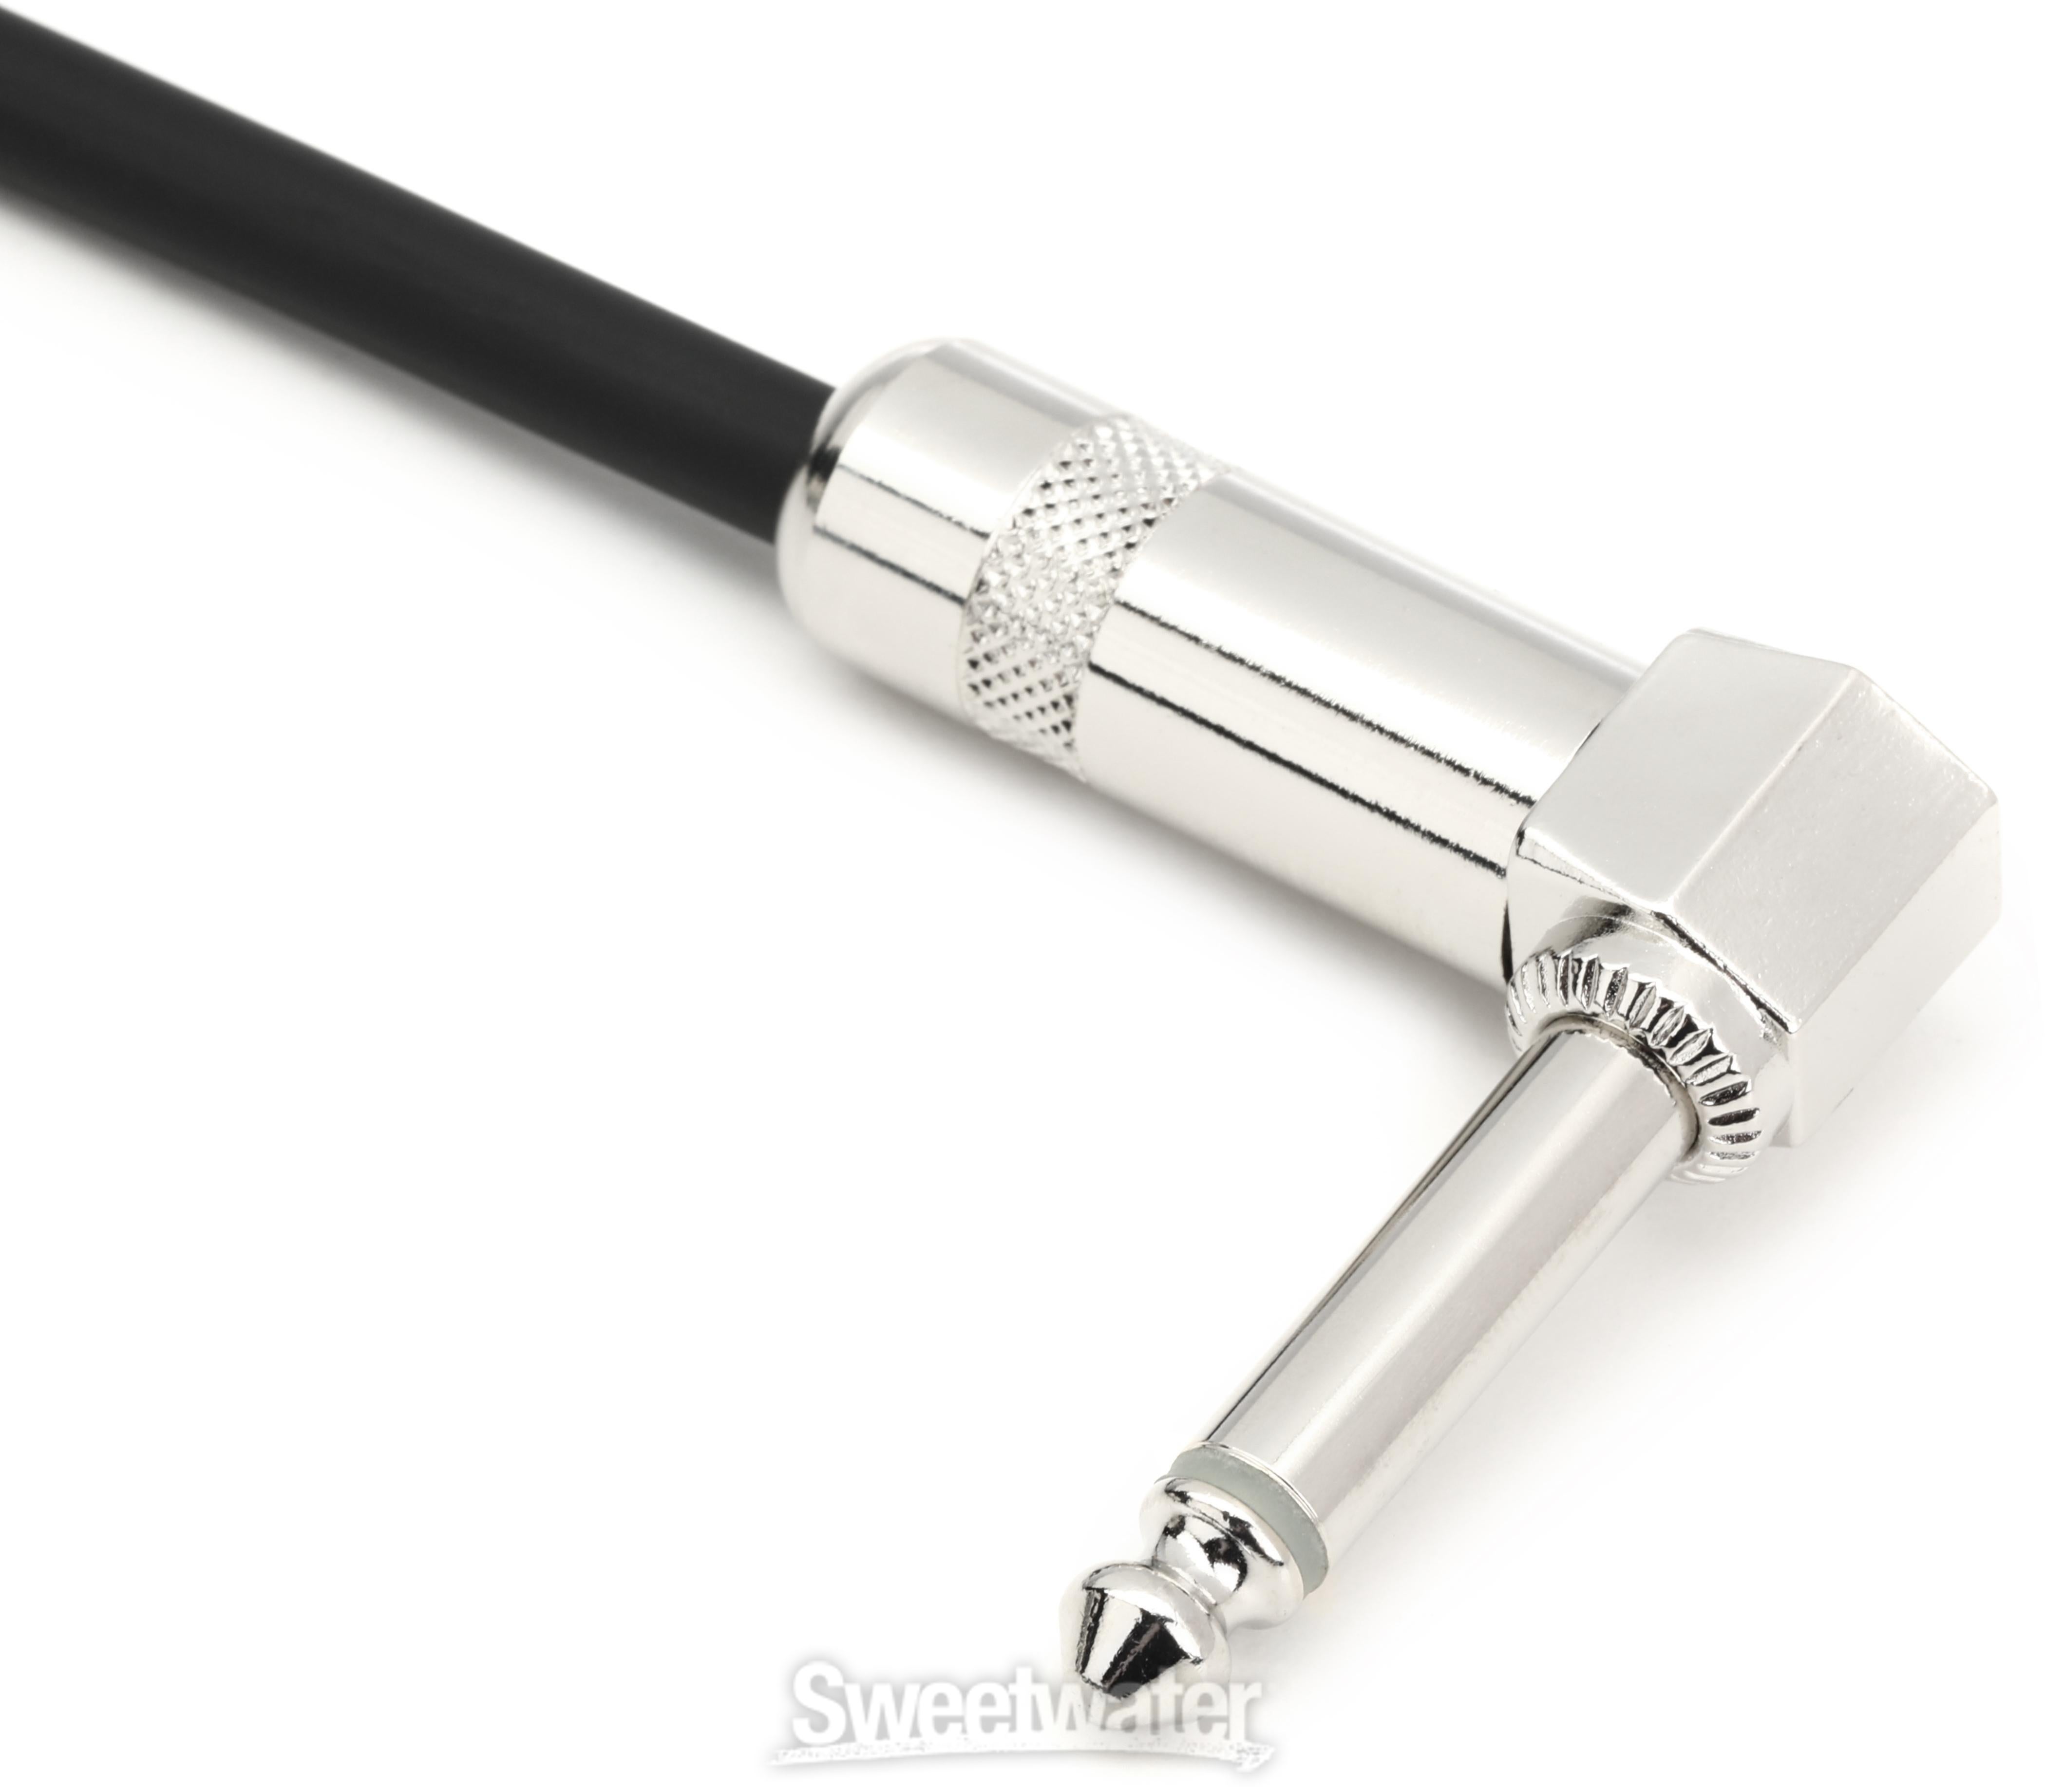 RapcoHorizon G1 Instrument Cable - 30-foot | Sweetwater